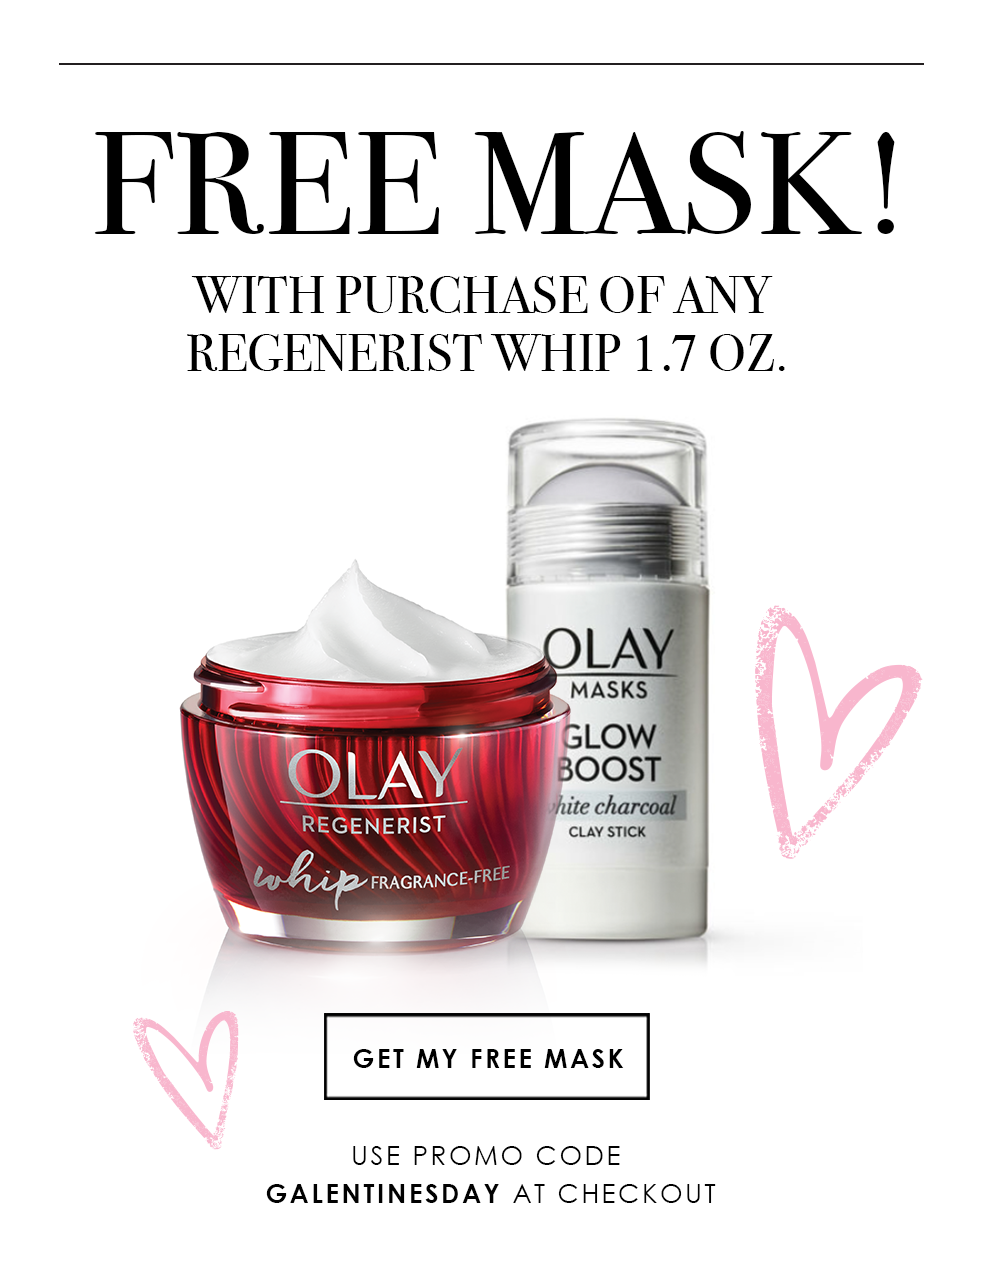 Get a free mask use code GALENTINESDAY